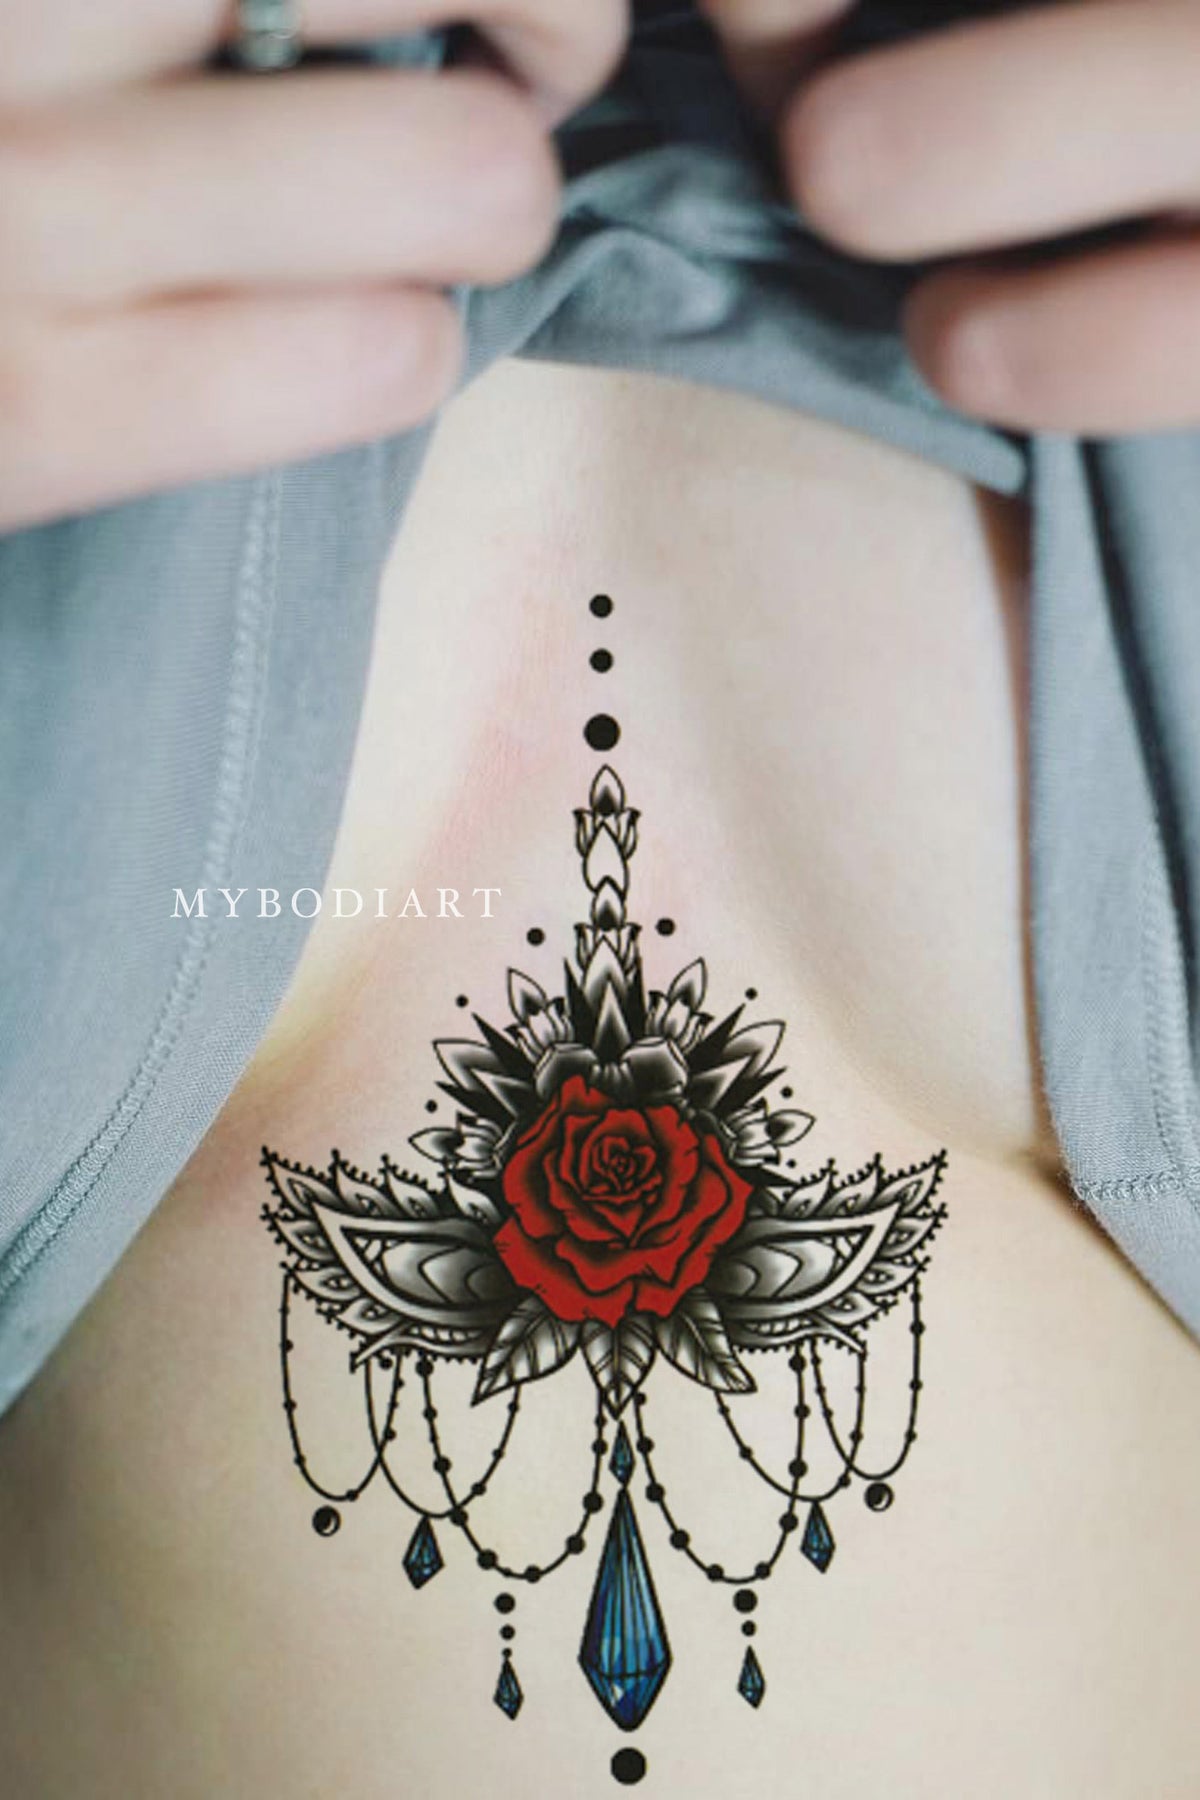 Lacy rose sternum tattoo, im getting it. So beautiful and kinda classy but  also not too girlie to me. Love it | Lace tattoo, Rose tattoos, Chest  tattoos for women